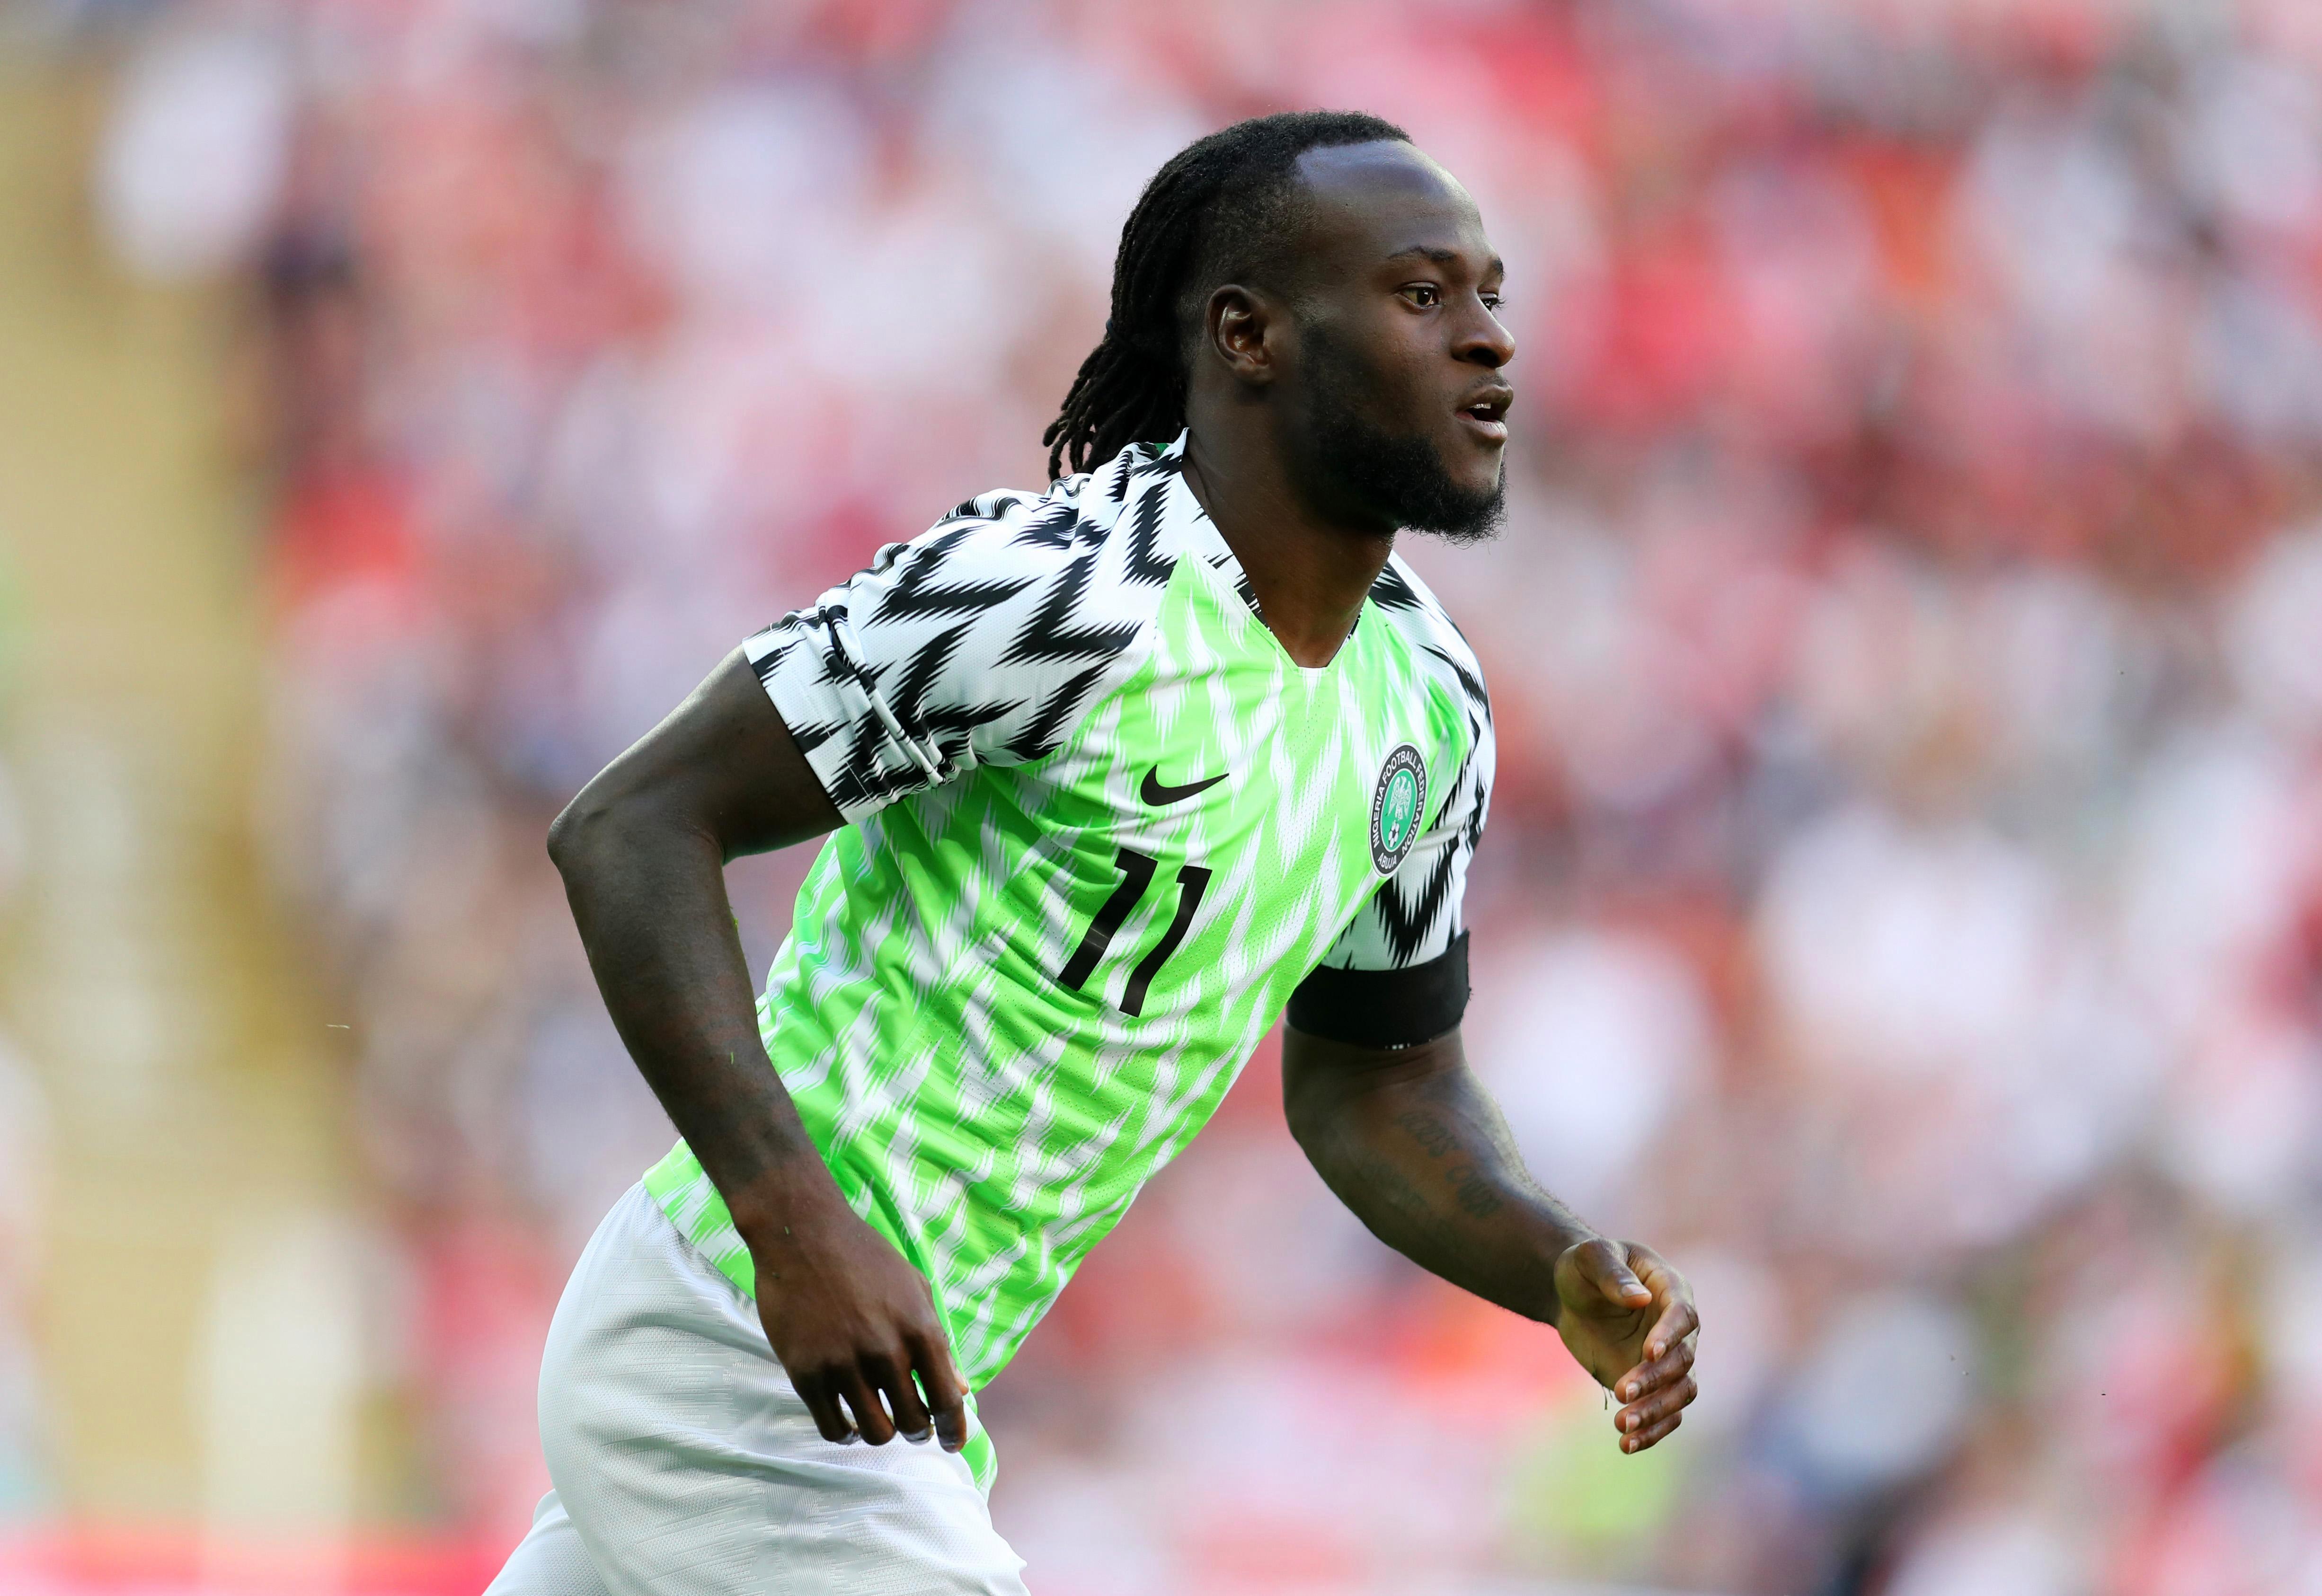 Victor Moses retires from international football with Nigeria at age 27 to focus on Chelsea career